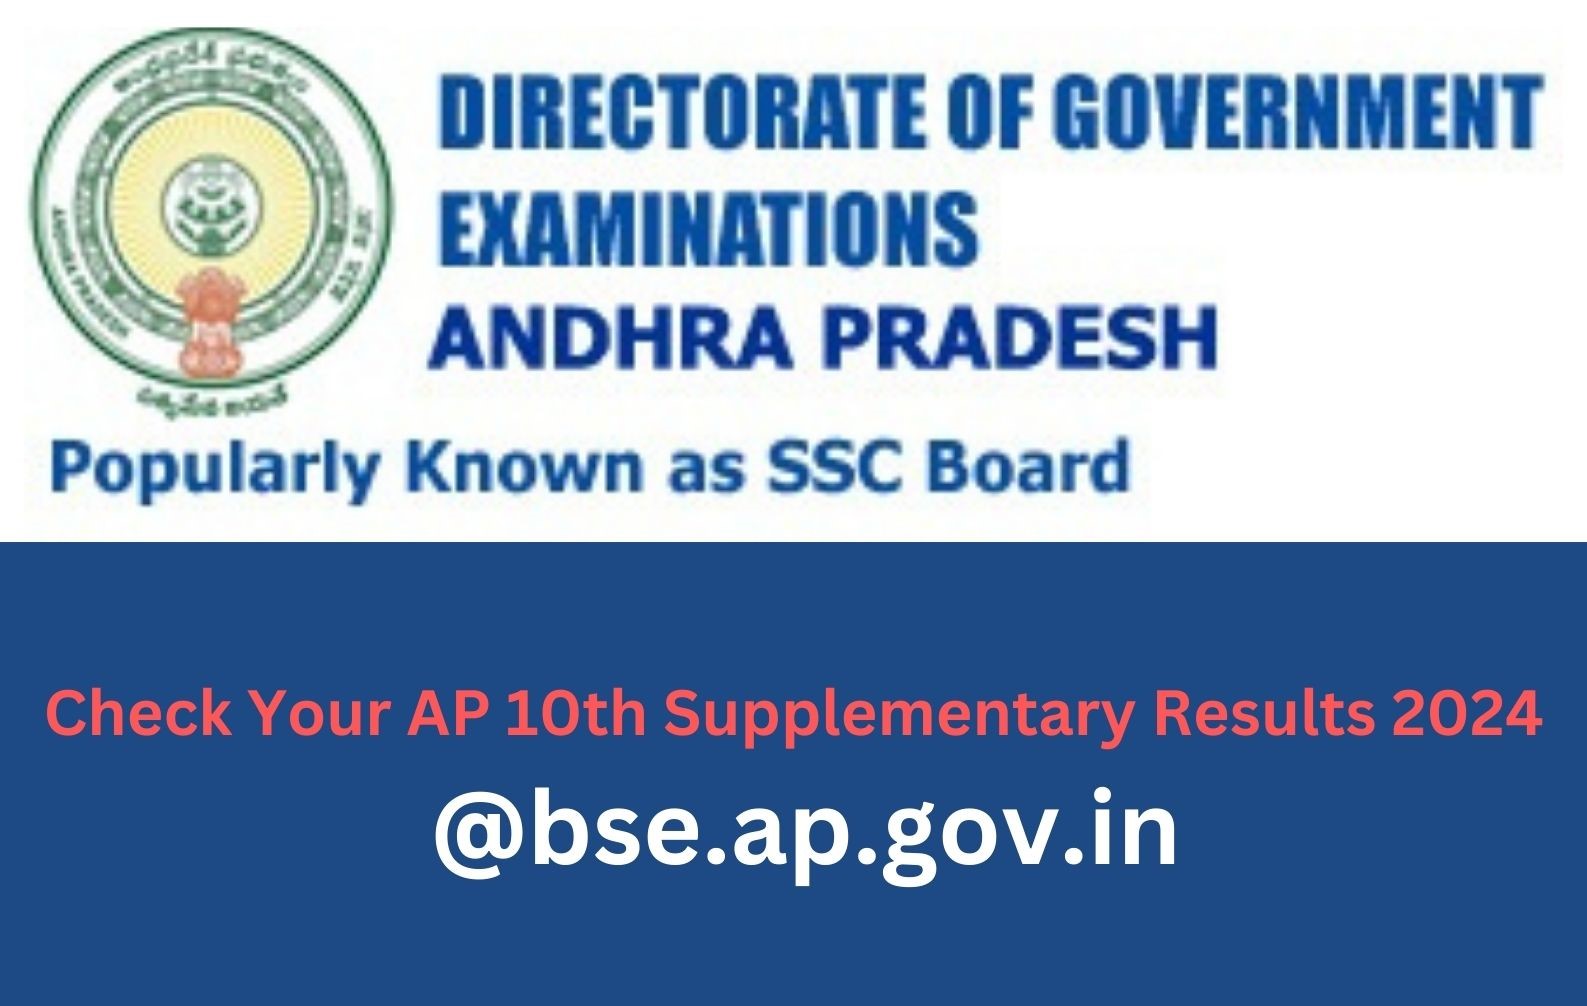 Check Your AP 10th Supplementary Results 2024 @bse.ap.gov.in